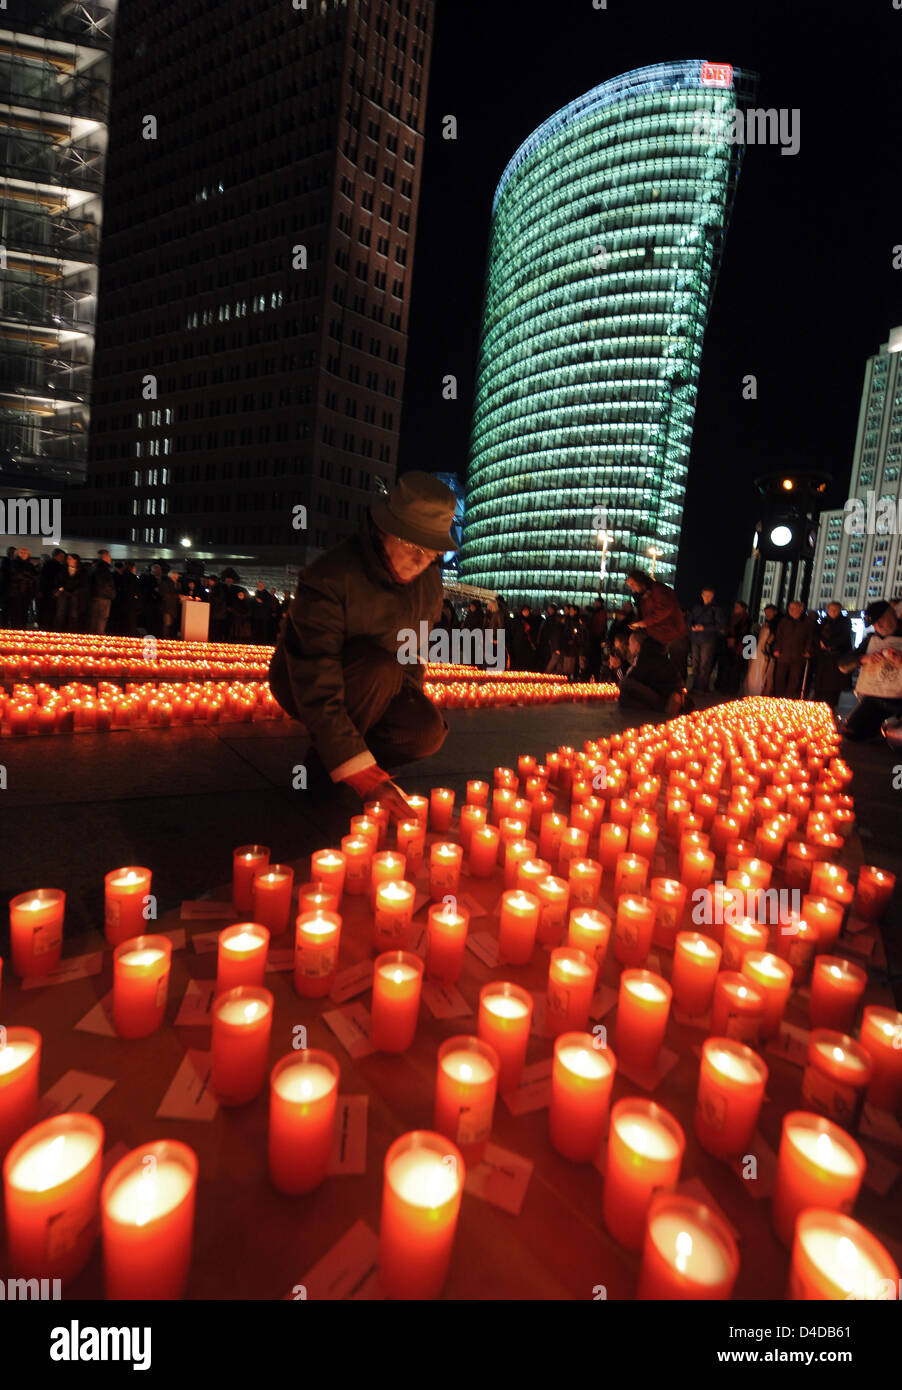 Candles are placed in commemoration at Potsdamer Platz in Berlin, Germany, 12 April 2008. 4646 candles had been lit after a silent walk to the German Railways headquarters to commemorate Berlin's victims of Nazi-Germany. The Reichsbahn transported approximately 3 million persons to concentration and extermination camps. Photo: Gero Breloer Stock Photo